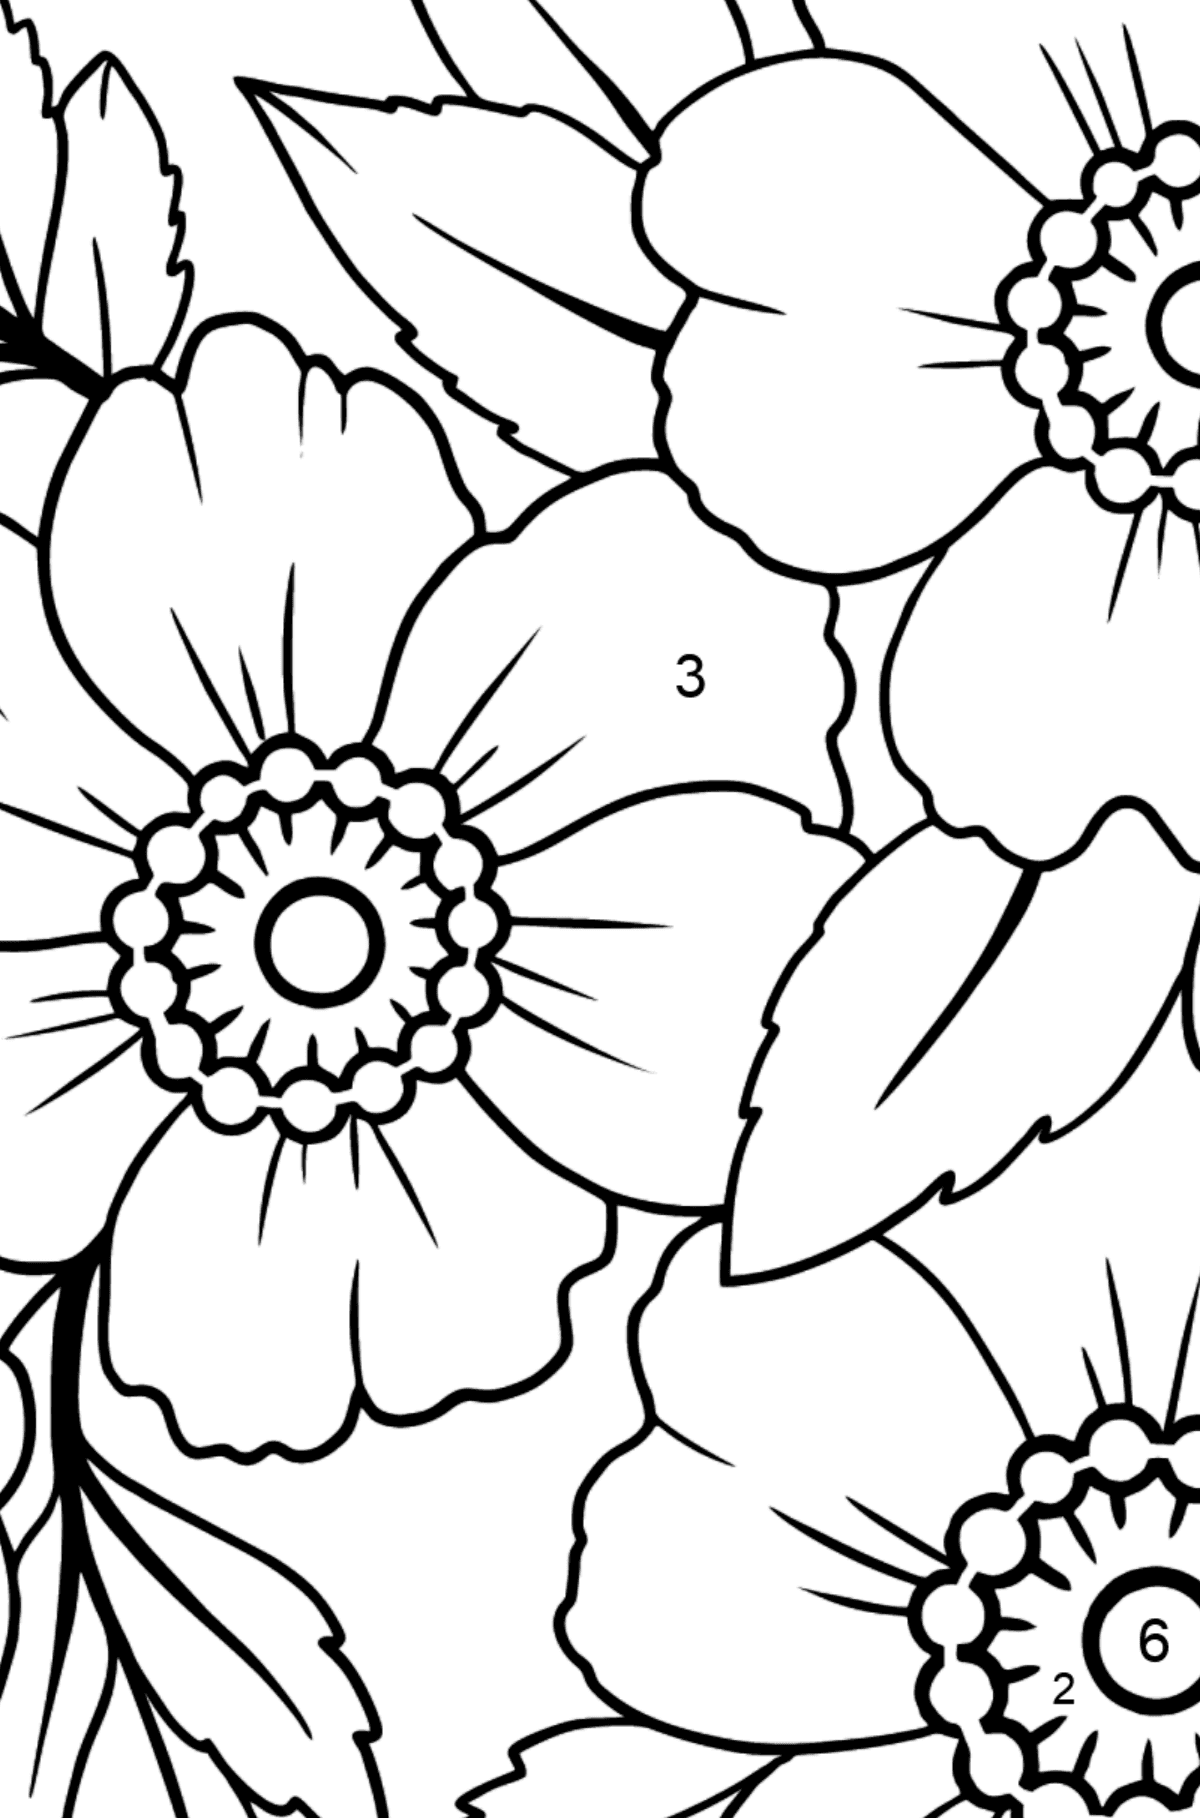 Flower Coloring Page - Japanese Velvet Anemone - Coloring by Numbers for Kids